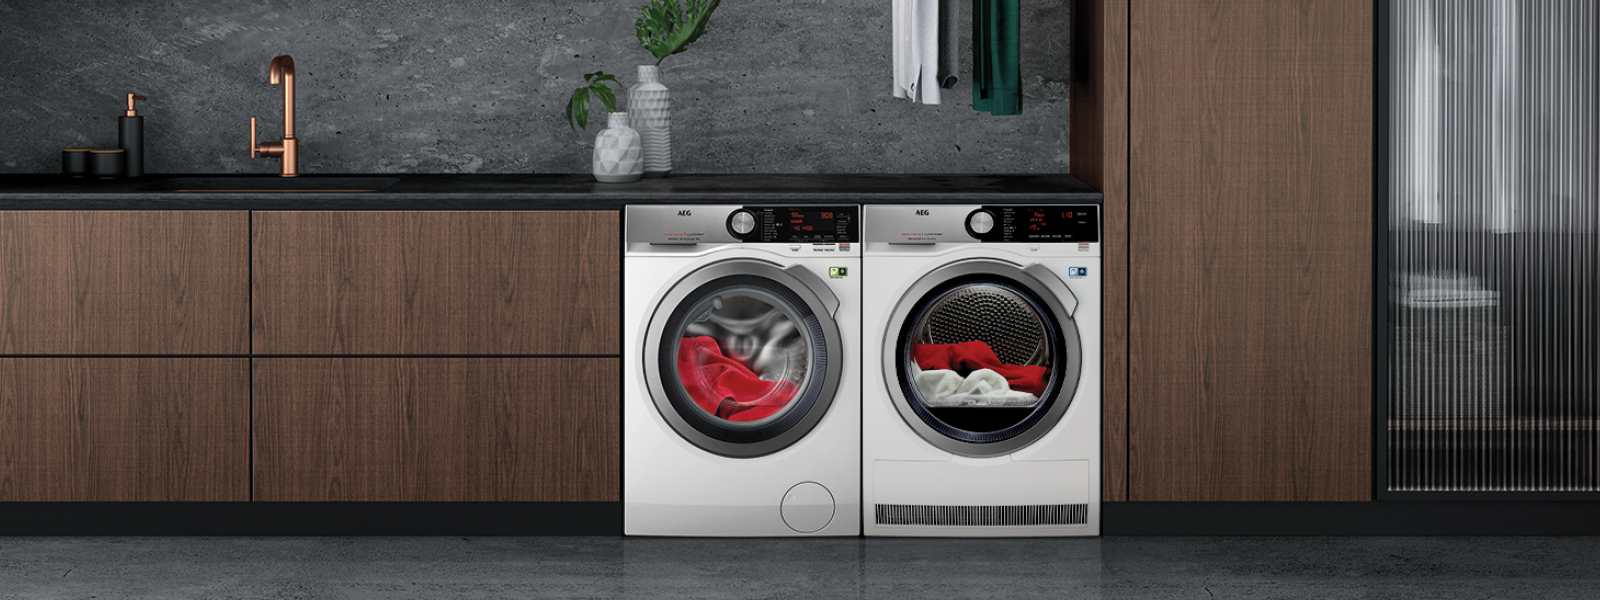 Save 10% When You Purchase An Eligible AEG Washer & Dryer In One Transaction* at Hart & Co